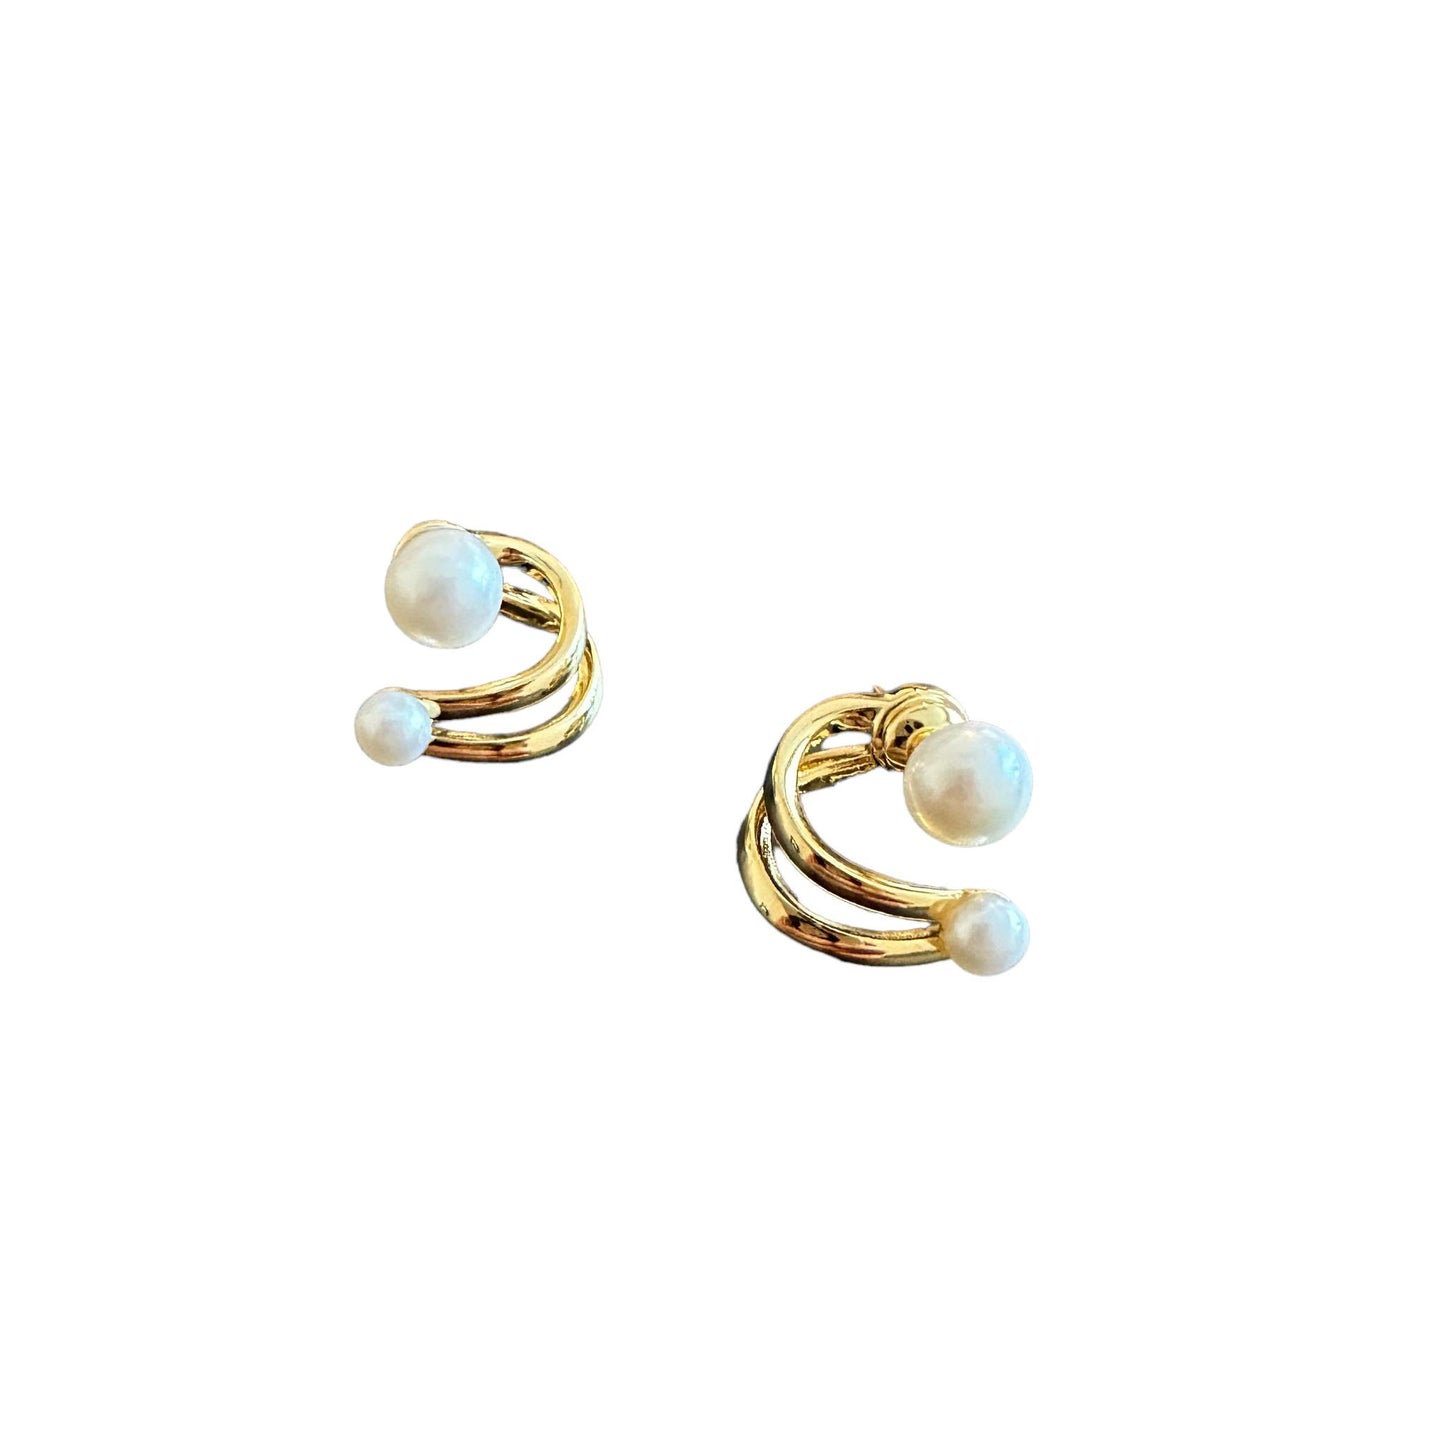 Layered Double Pearl Earrings